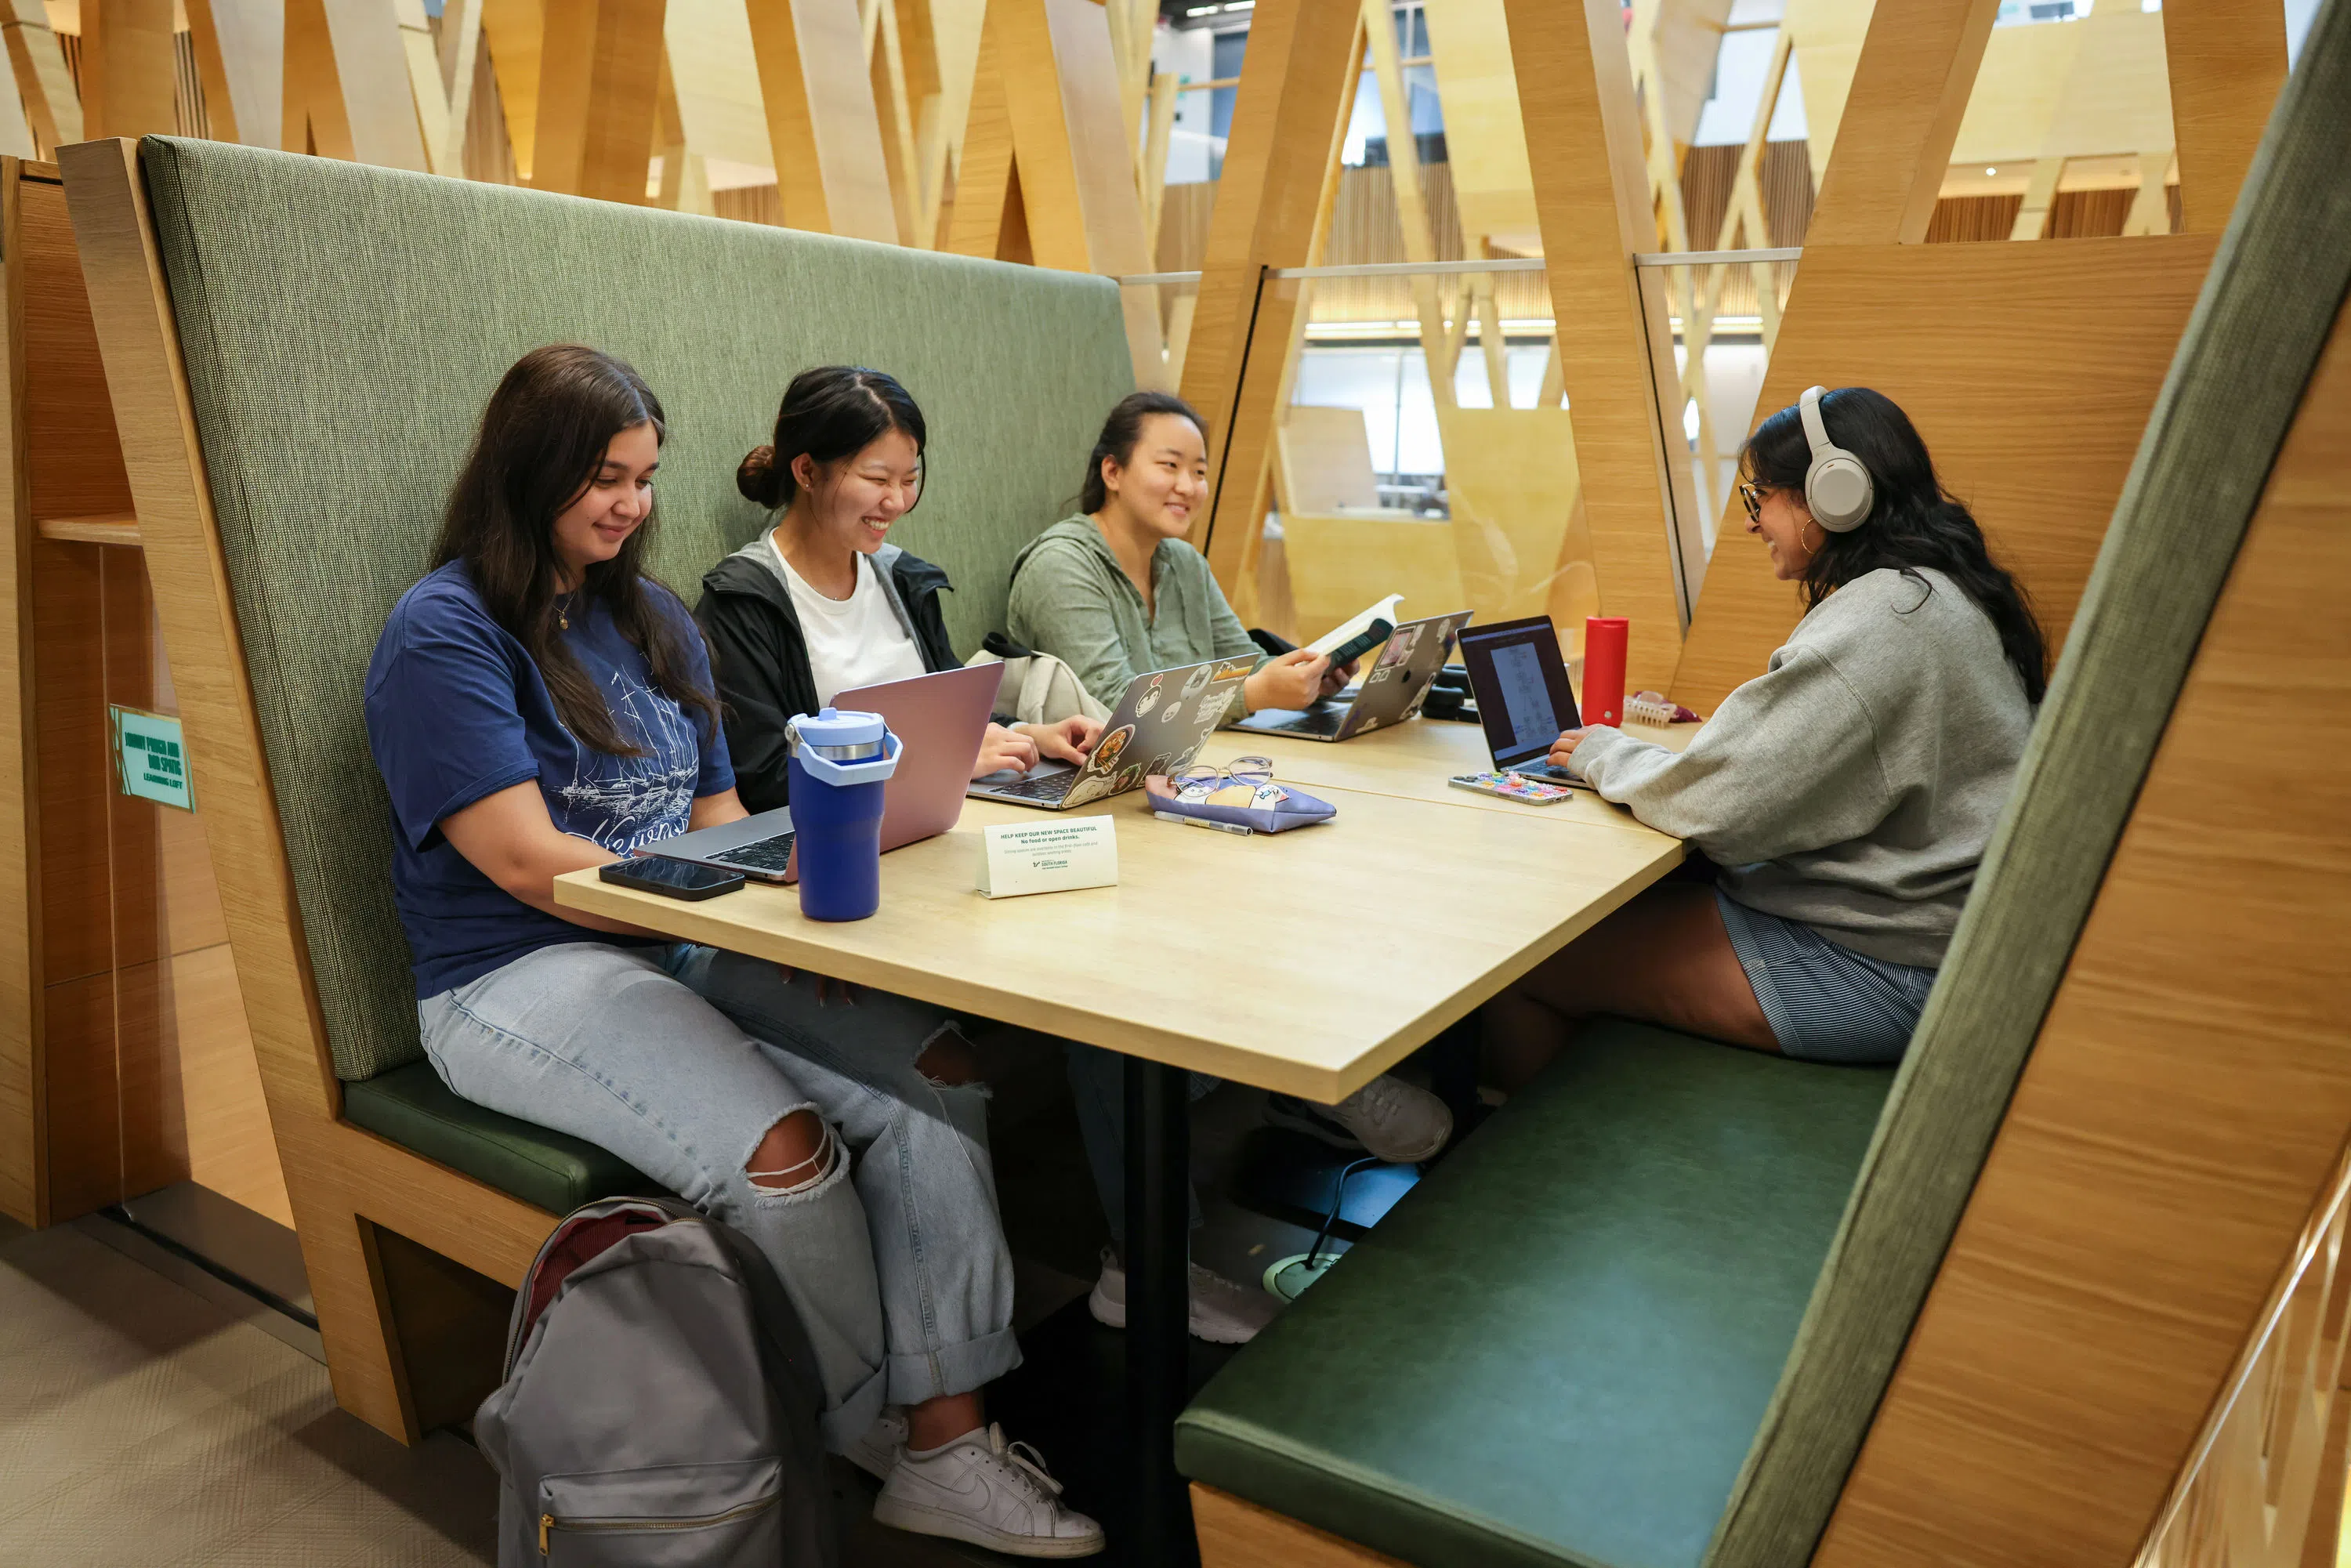 Students studying in a learning loft.